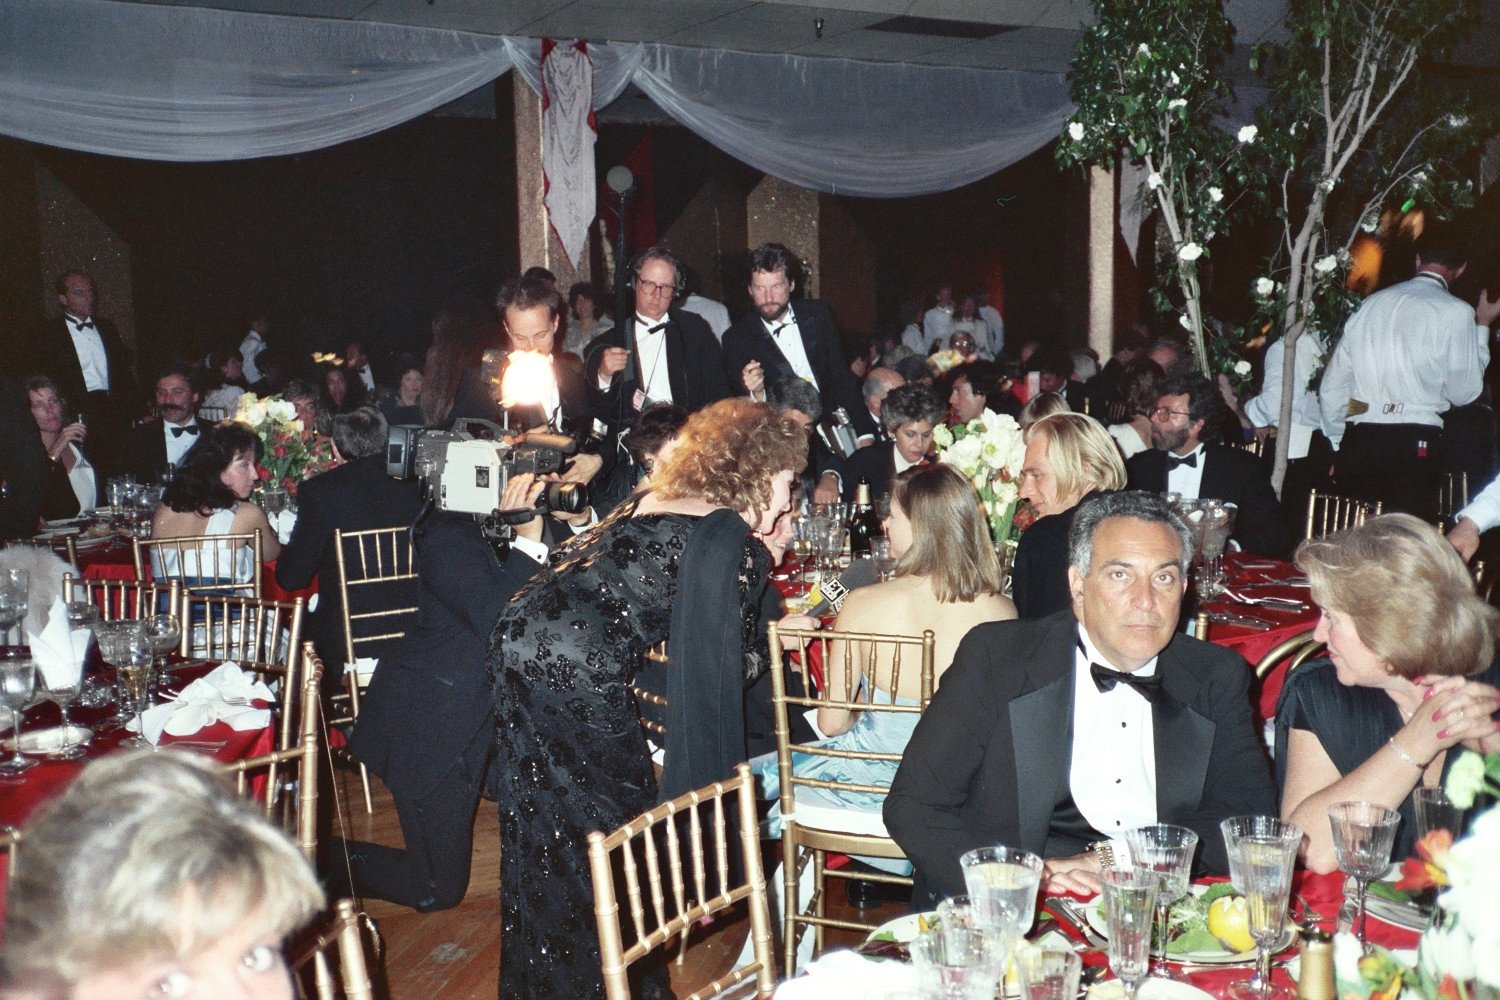 many people sitting around tables at formal functions